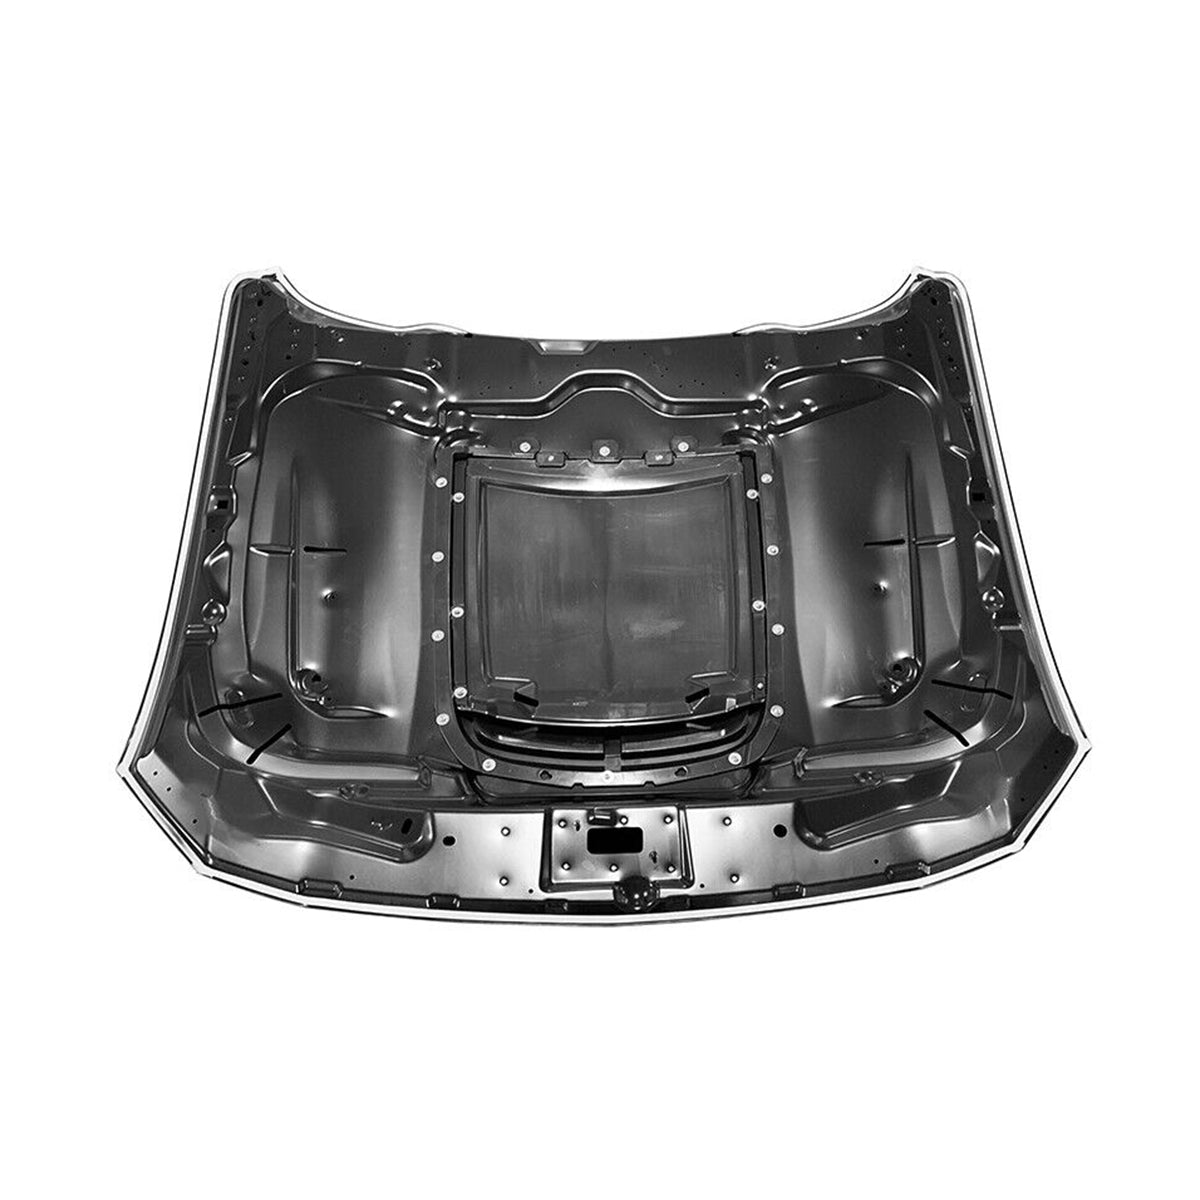 Replacement GT500 HOOD WITH HOOD SCOOP, 2018-2021 Ford Mustang, (Alum)